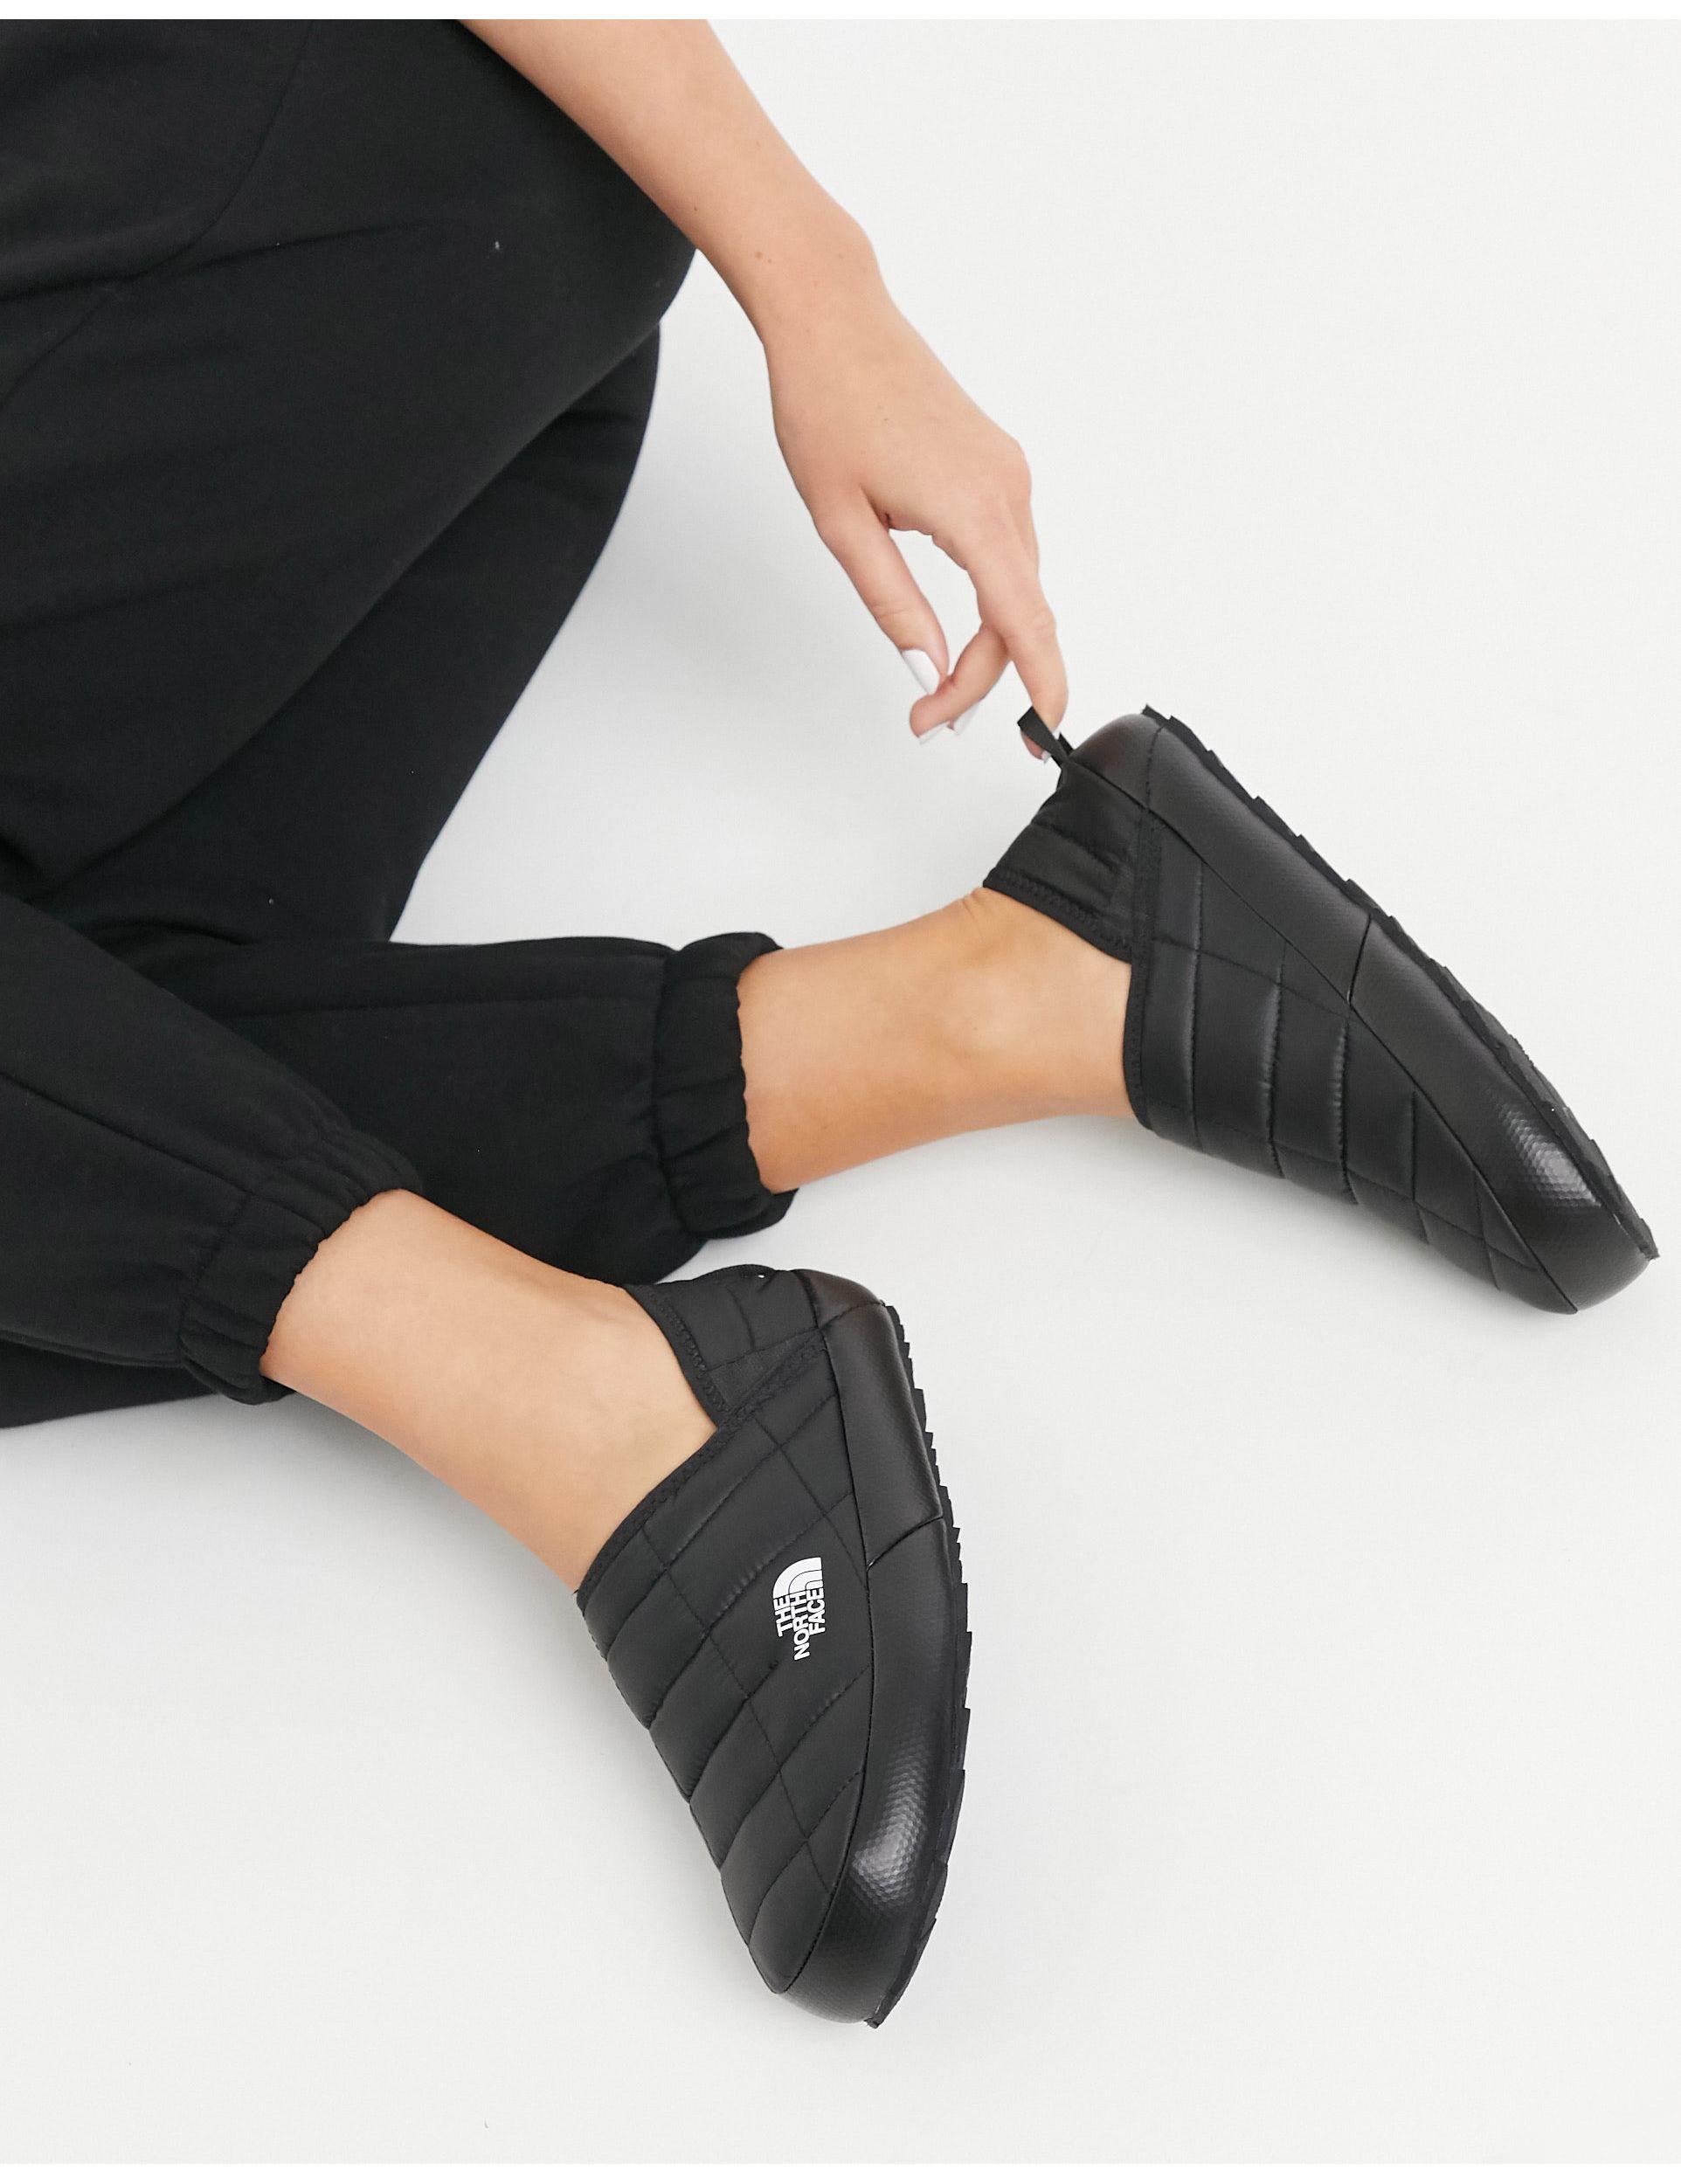 The North Face Thermoball Traction Mule V Shoe in Black | Lyst Australia